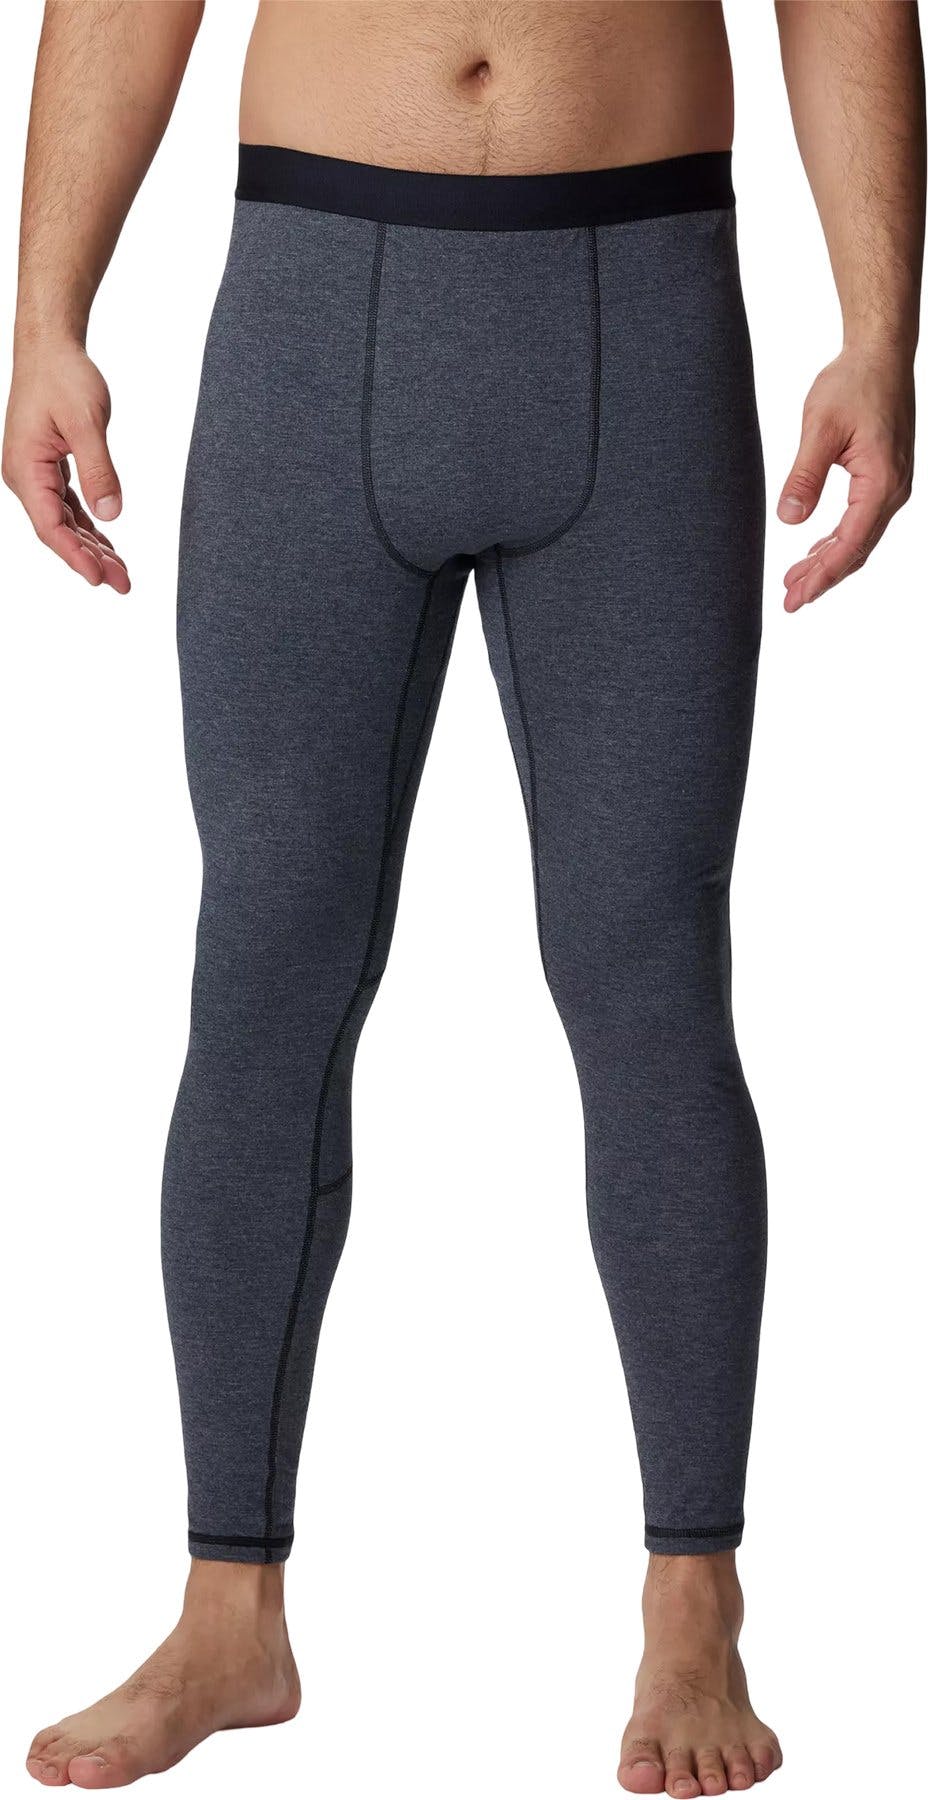 Product image for Tunnel Springs Wool Baselayer Tights - Men's 